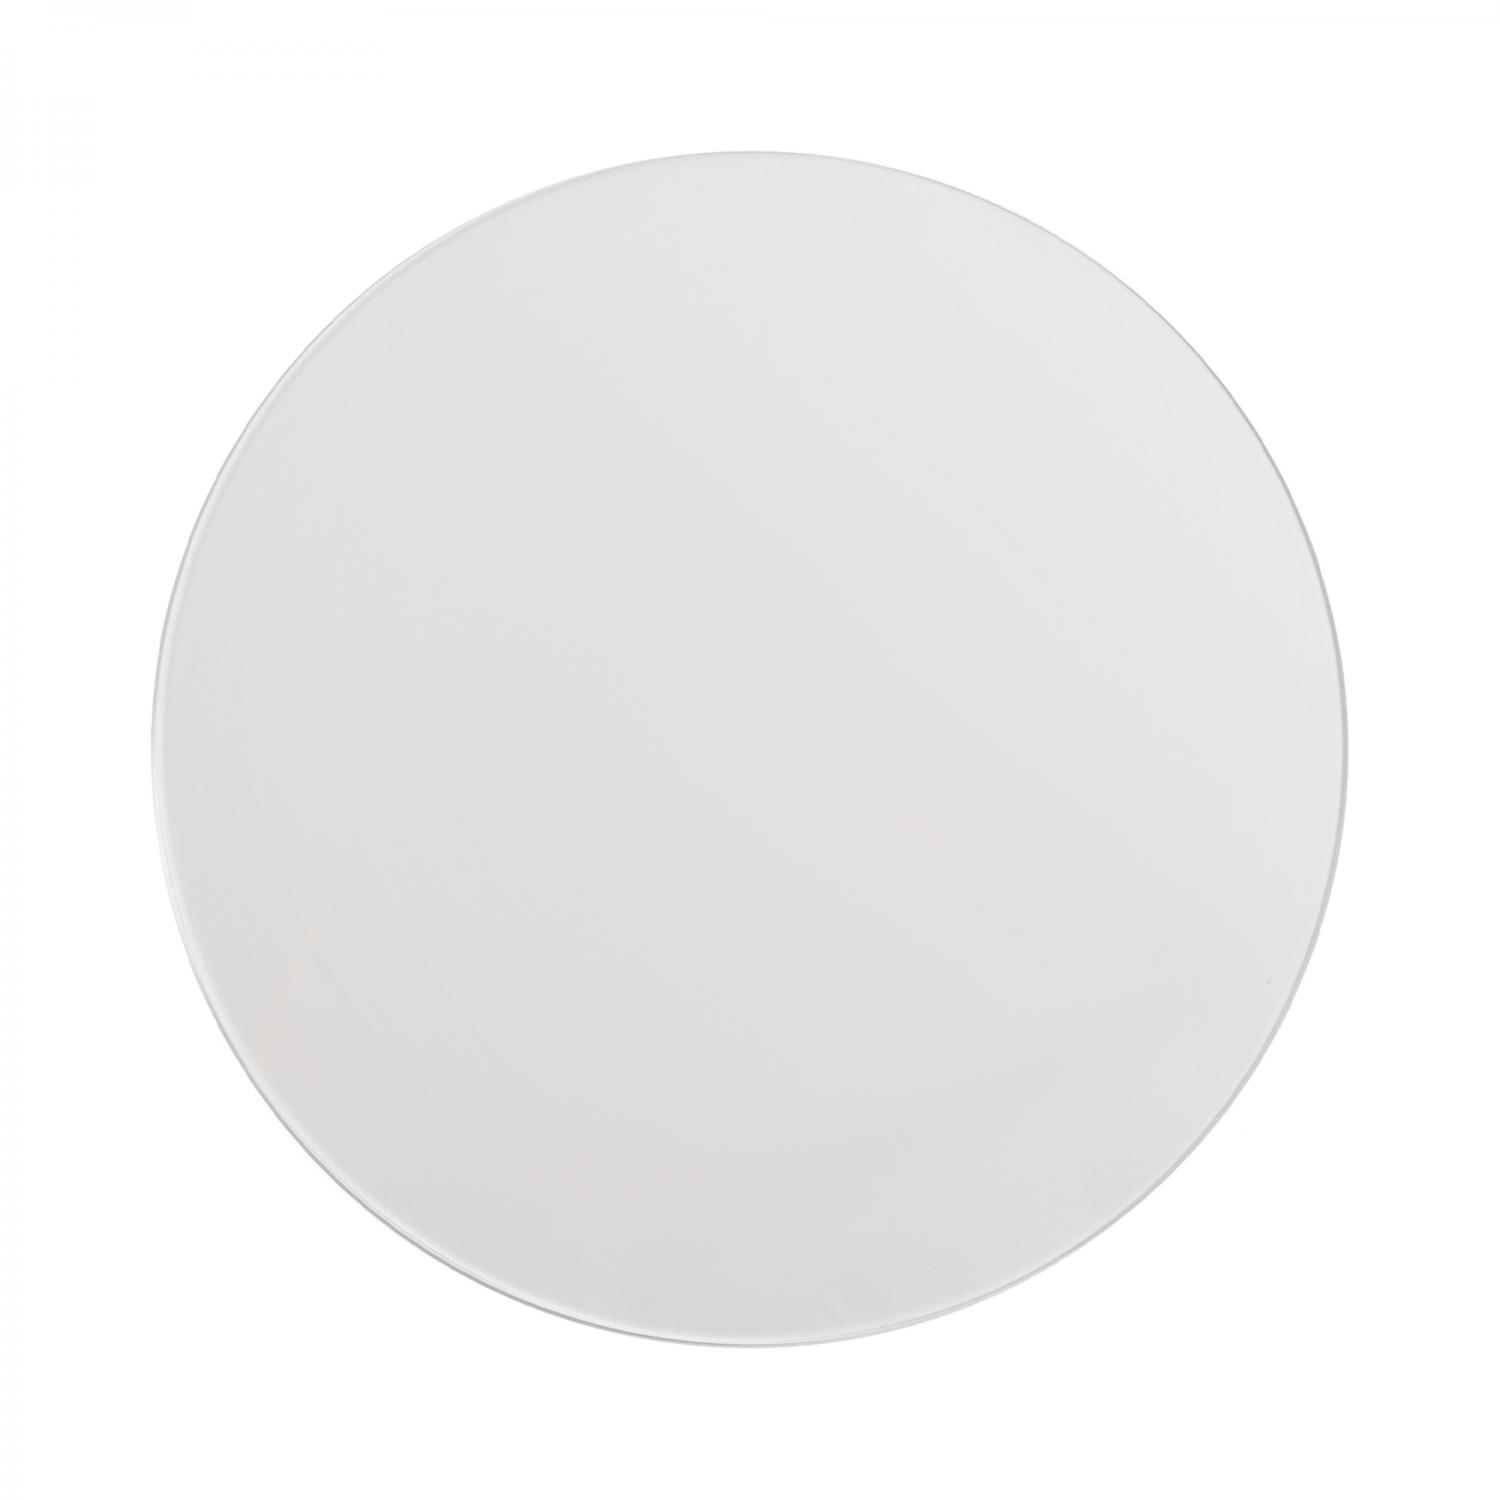 Single Acrylic Round Cake Disc 22 - 1/8 Inch Thick